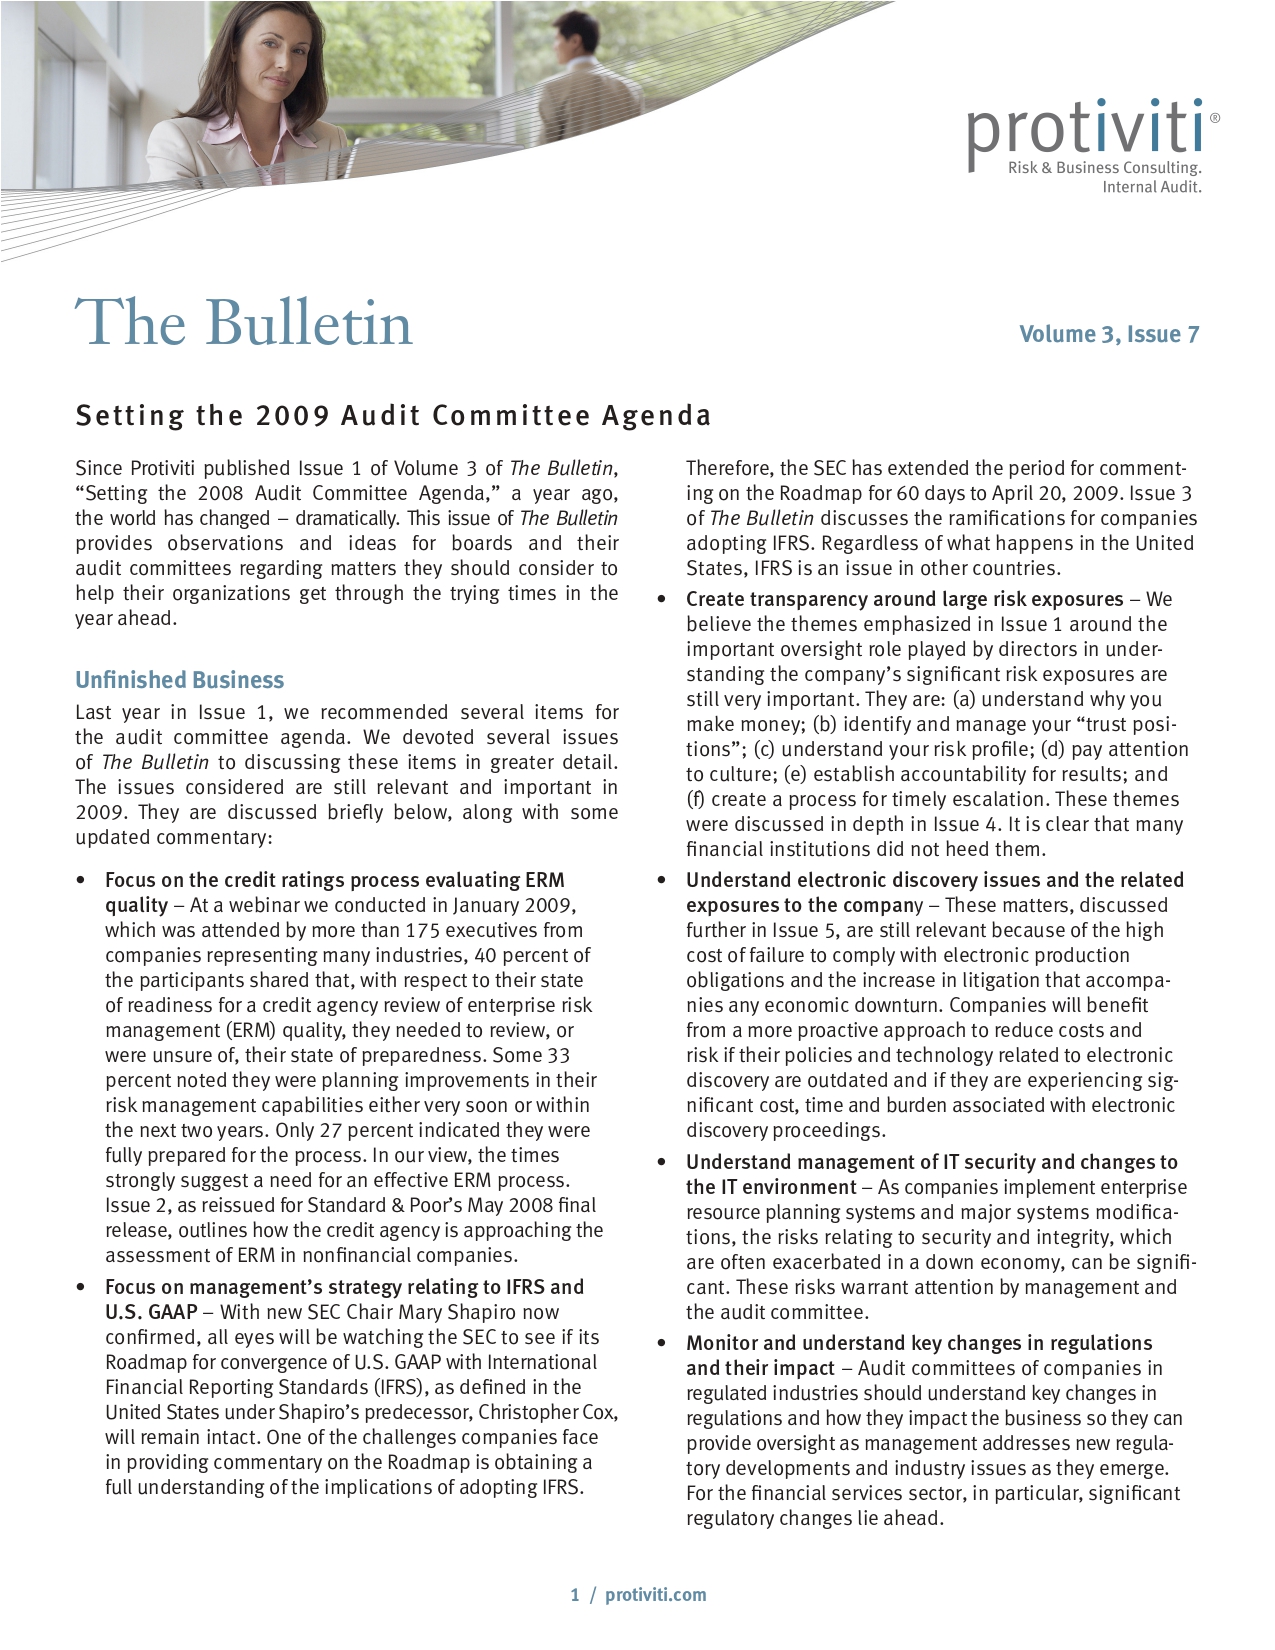 Screenshot of the first page of Setting the 2009 Audit Committee Agenda